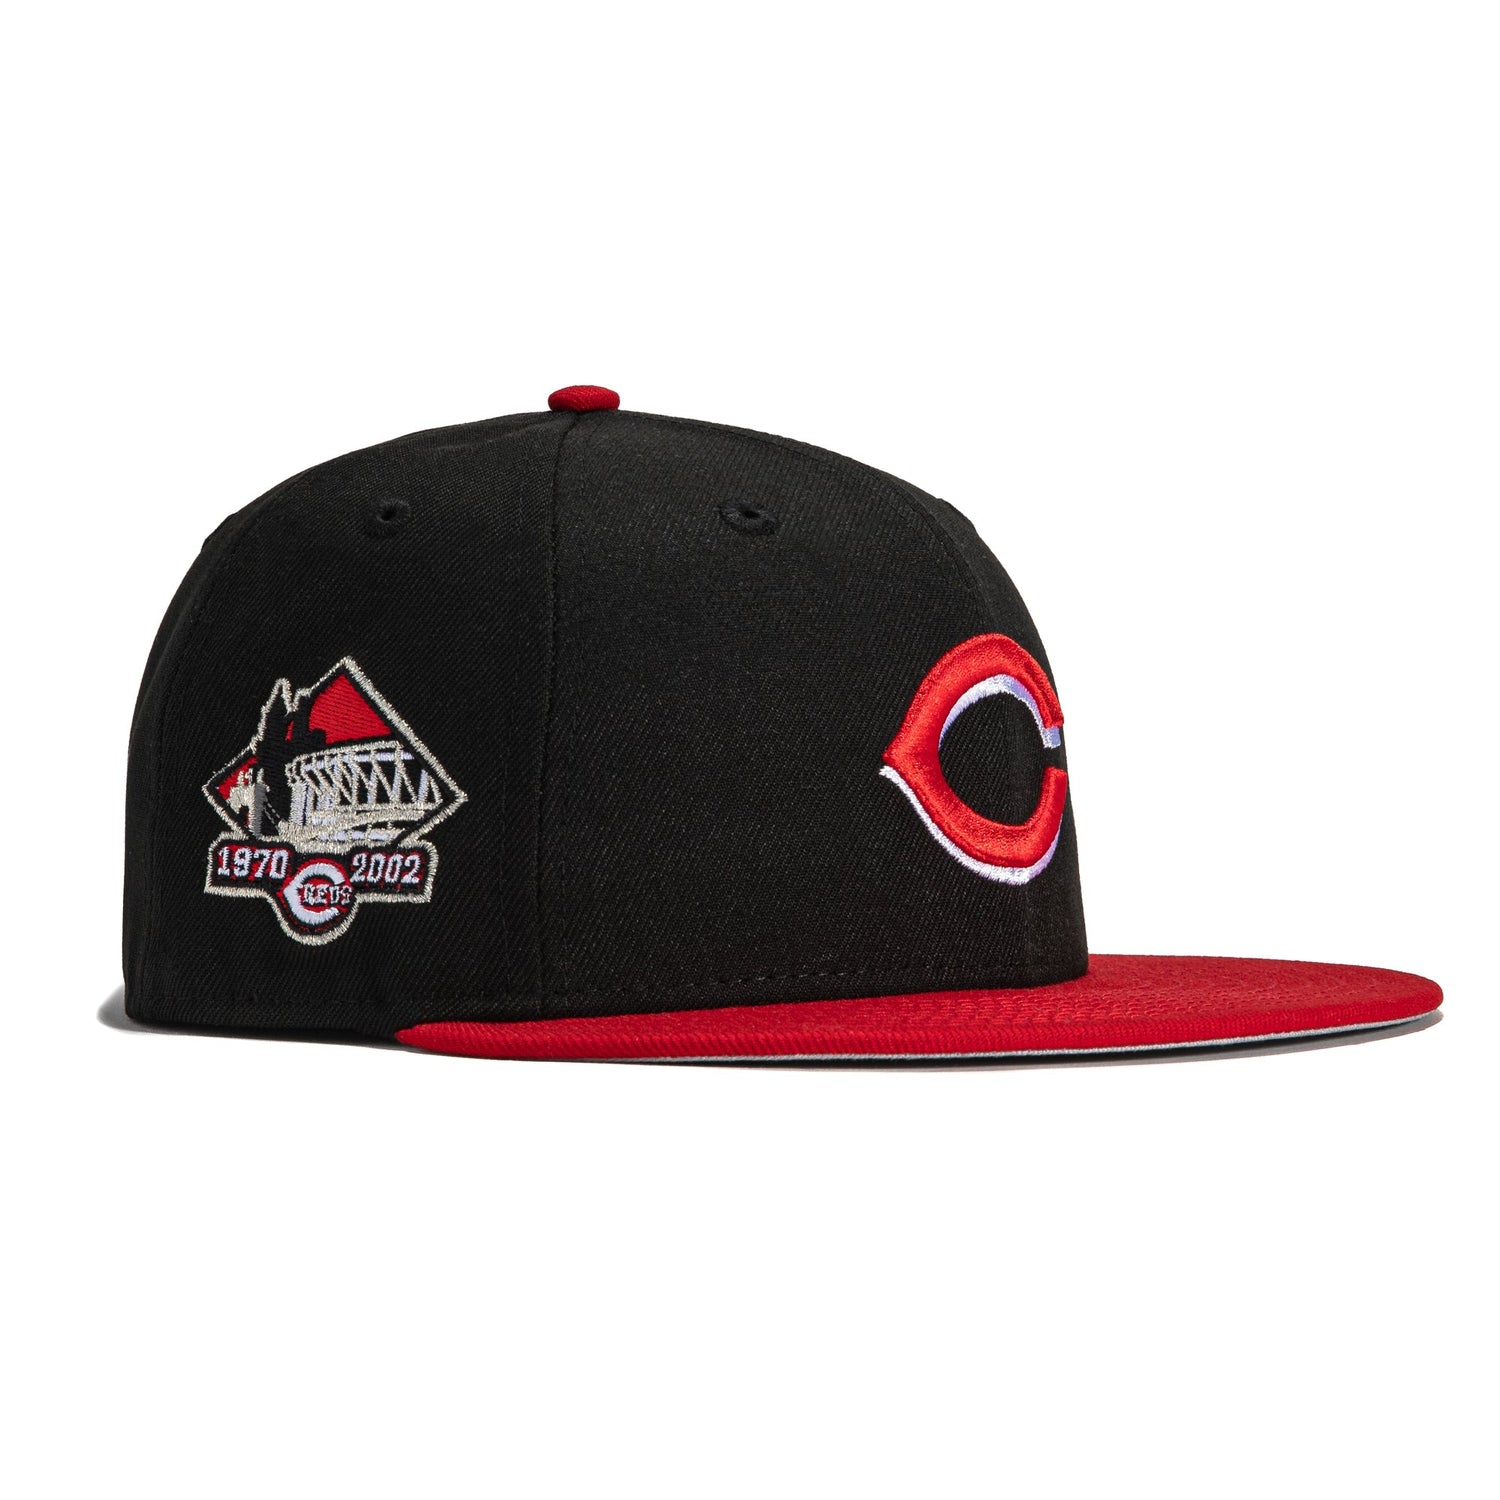 New Era 59FIFTY Cincinnati Reds River Front Patch Hat - Black, Red Black/Red / 7 1/4